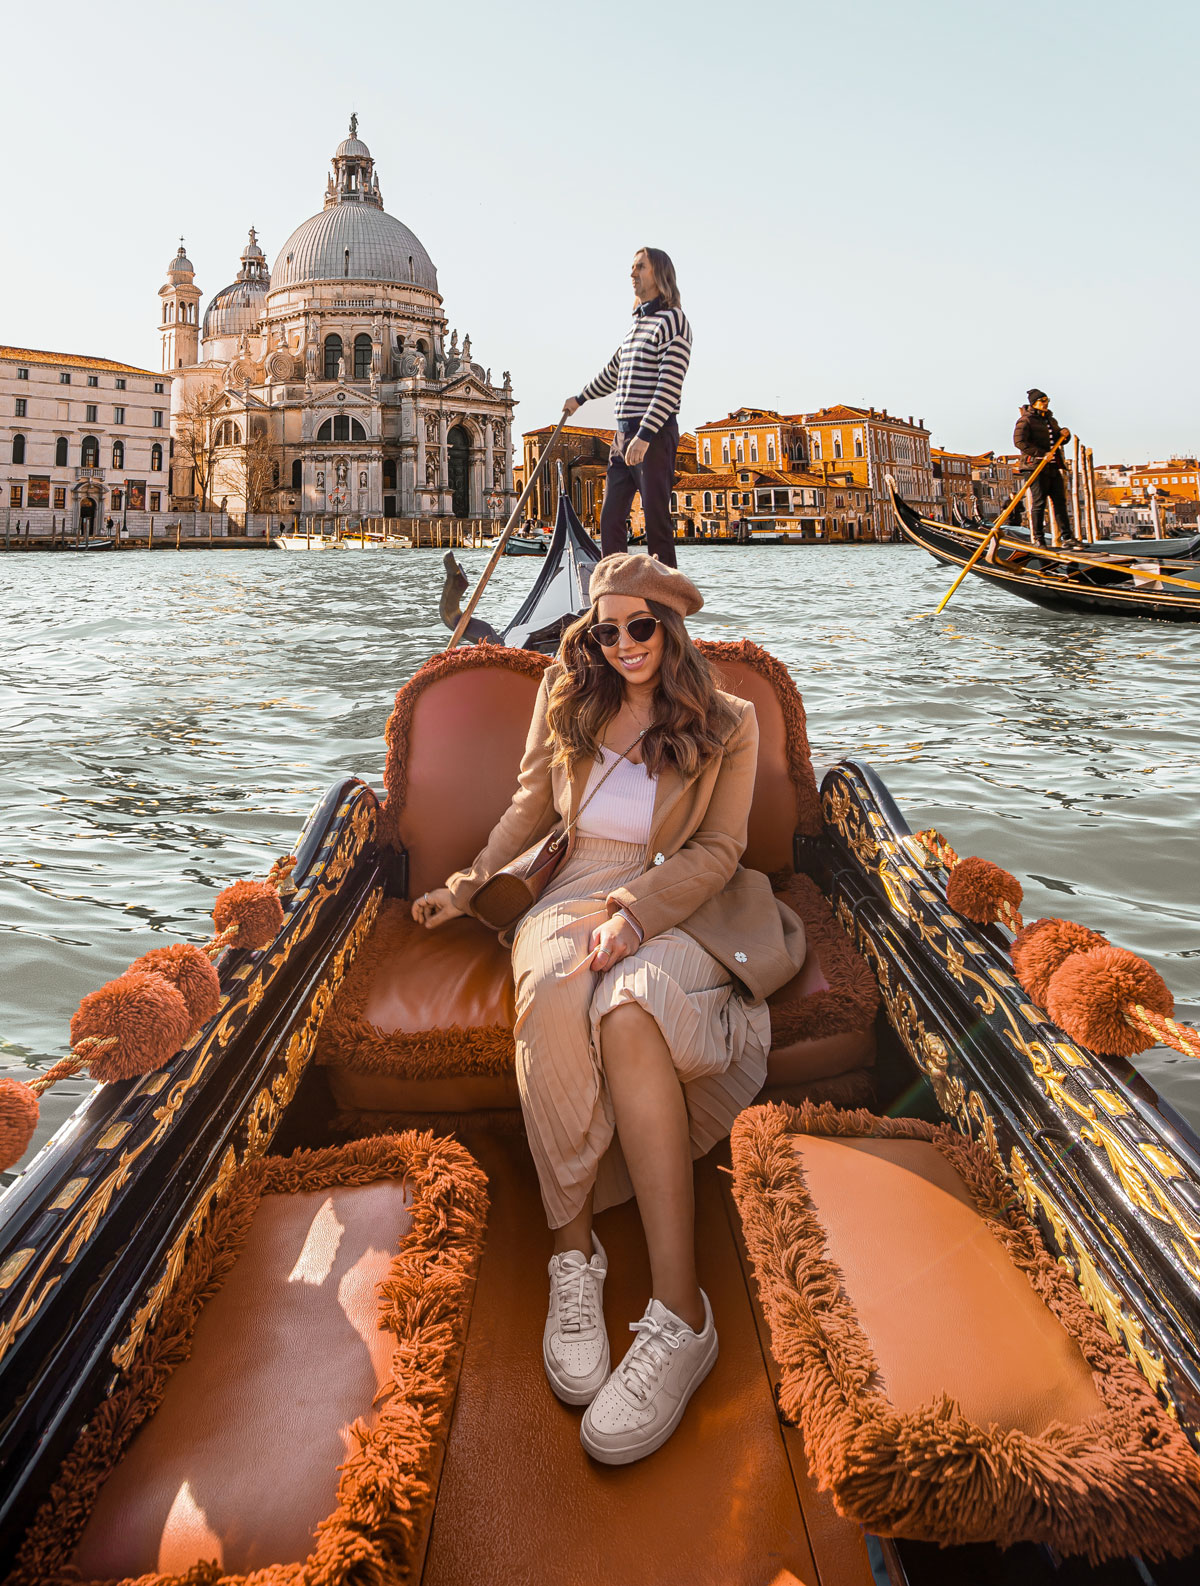 Kelsey sat in a gondola on the grand canal in venice